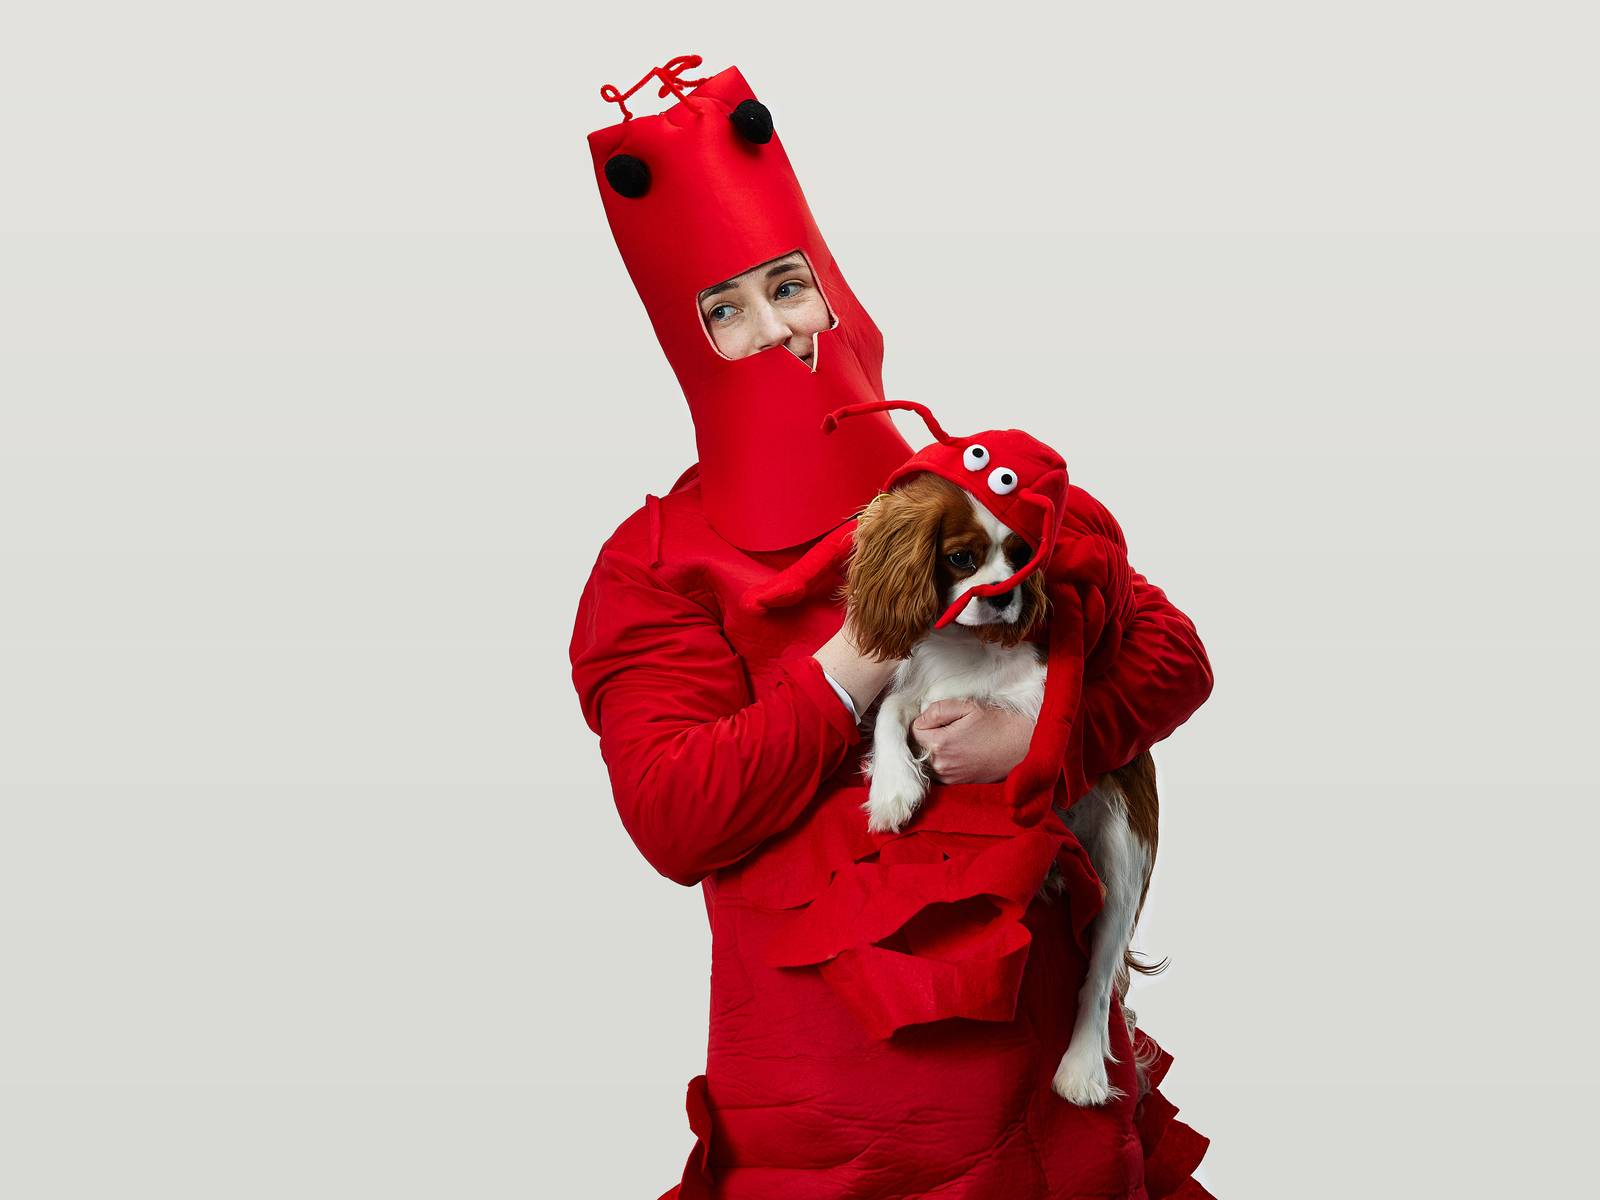 Jess dressed as a lobster